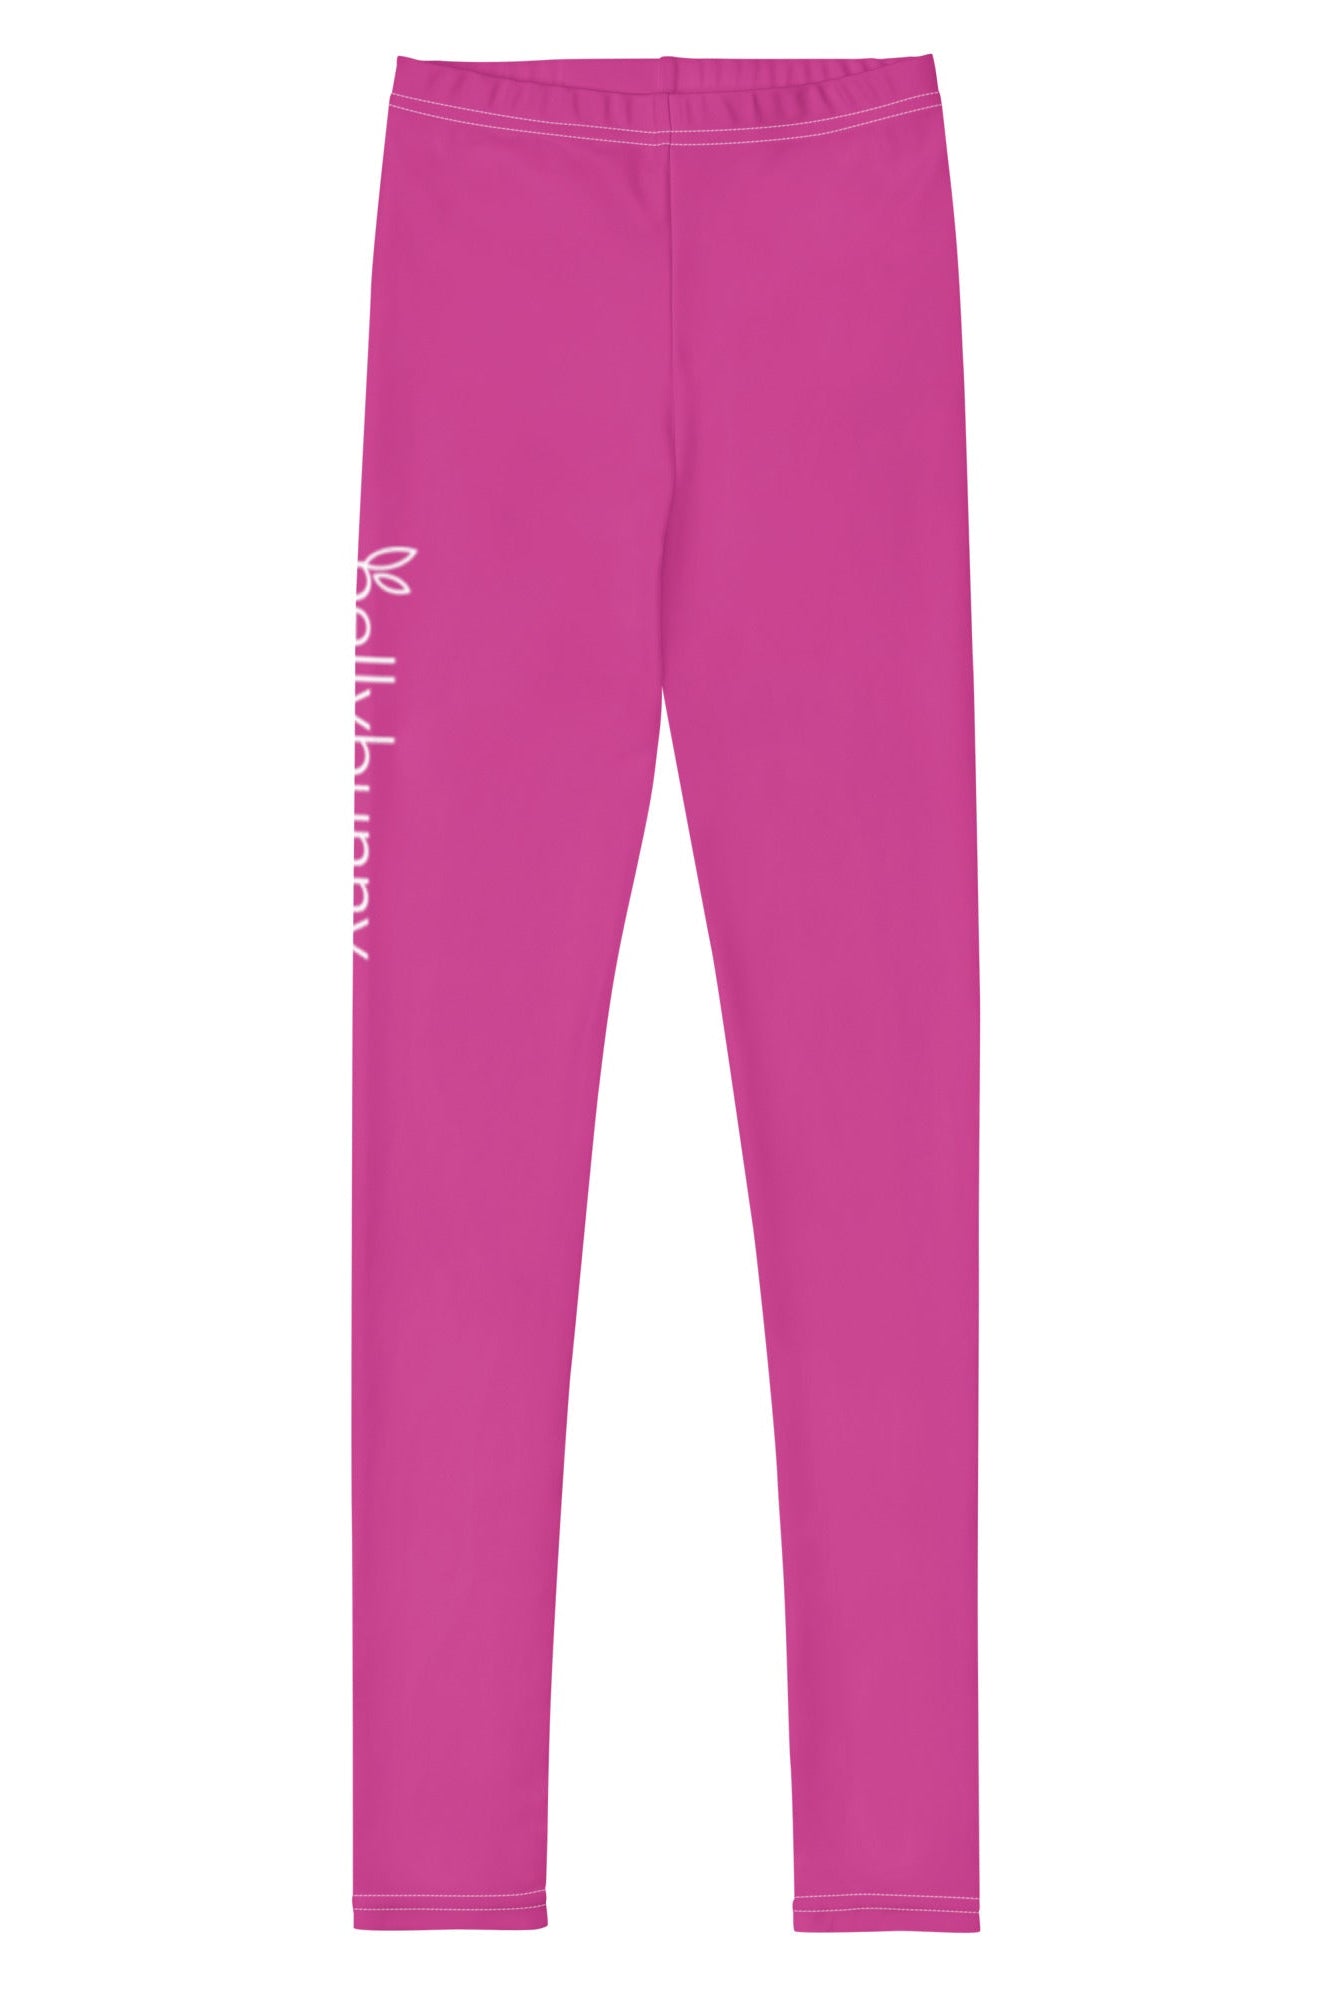 Bellybunny-Youth Leggings-pink with white logo